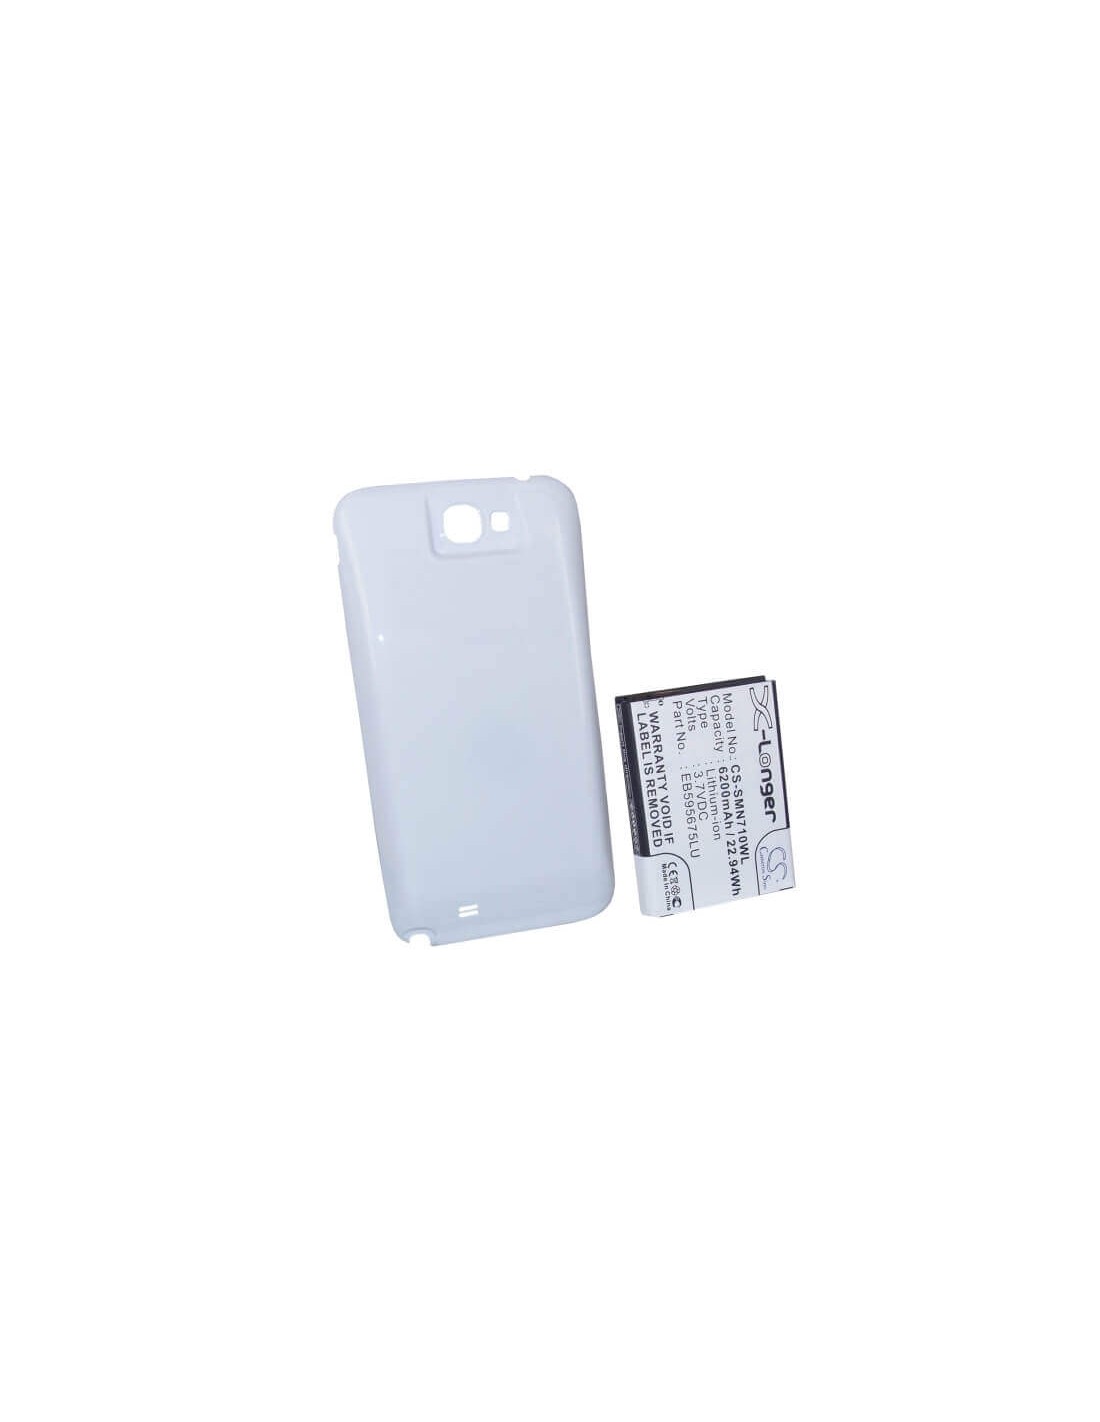 Battery for Samsung GT-N7100, GT-N7105, Galaxy Note II LTE 32GB white back cover 3.7V, 6200mAh - 22.94Wh